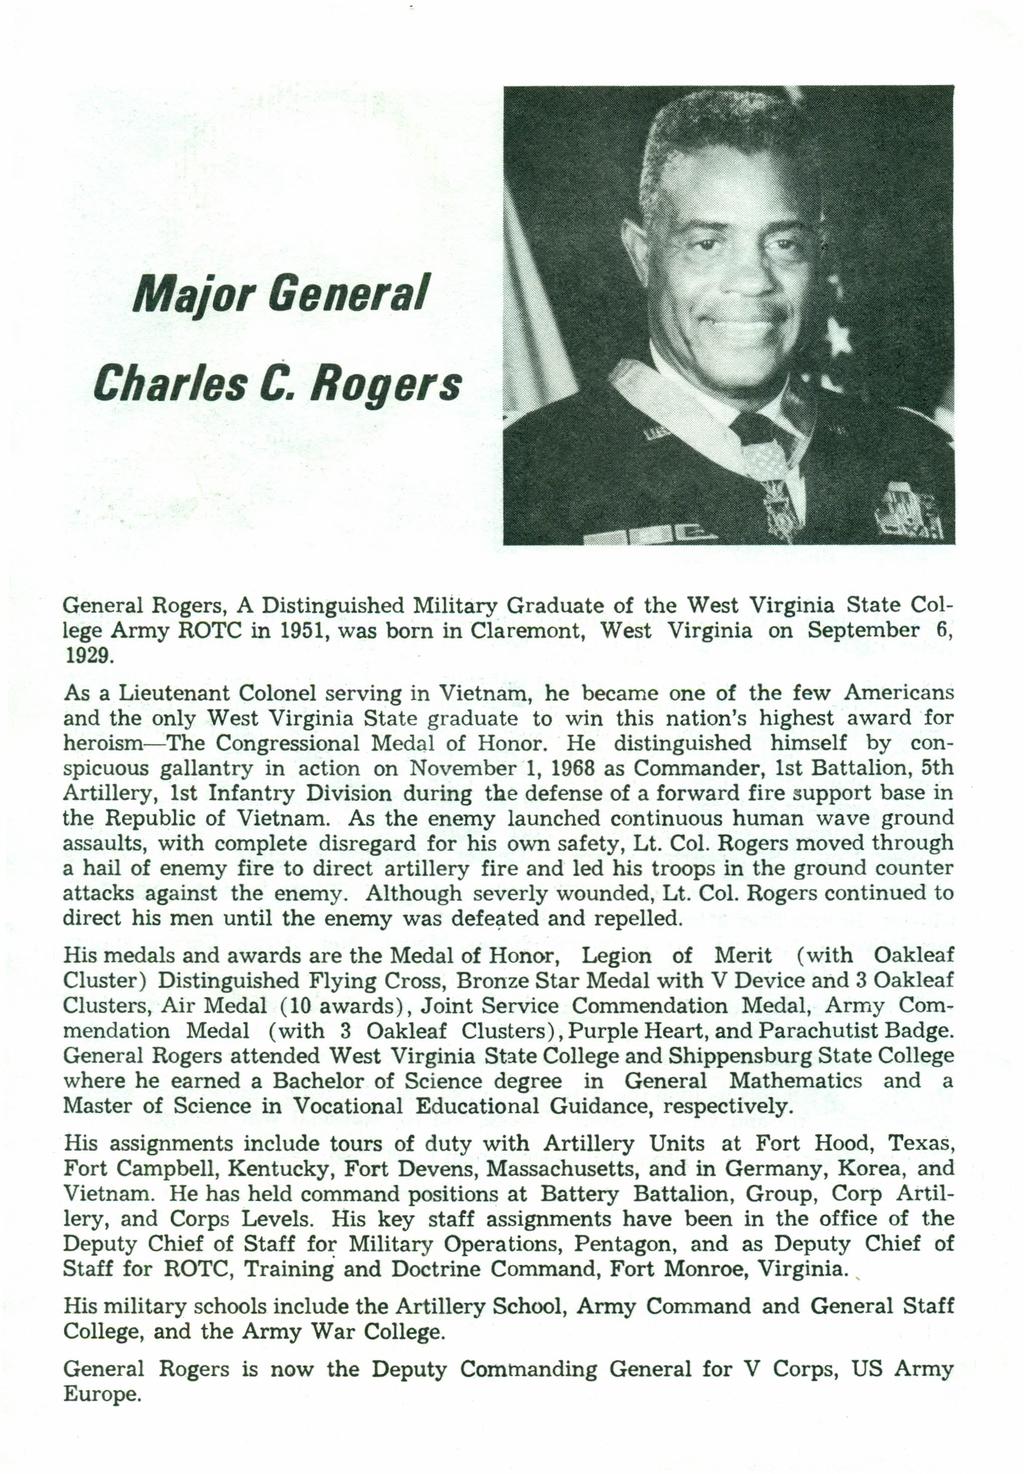 Major General Charles C. Rogers General Rogers, A Distinguished Military Graduate of the West Virginia State College Army ROTC in 1951,was born in Claremont, West Virginia on September 6, 1929.